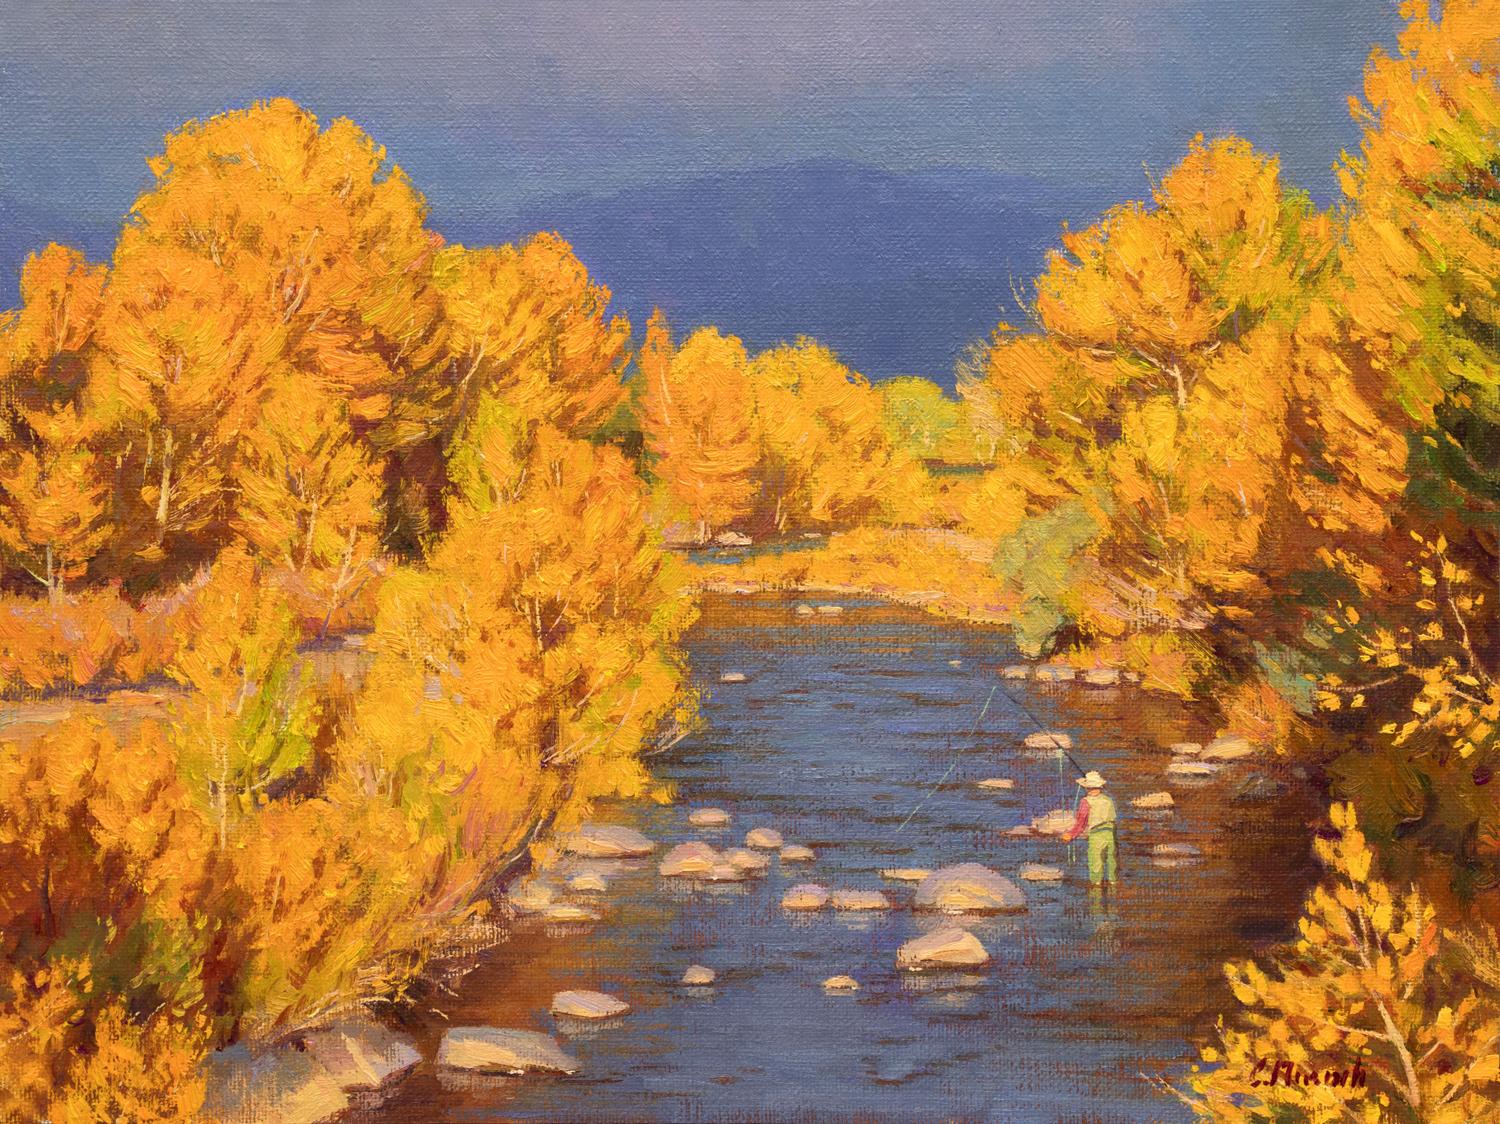 Autumn Textures - Painting by charles muench